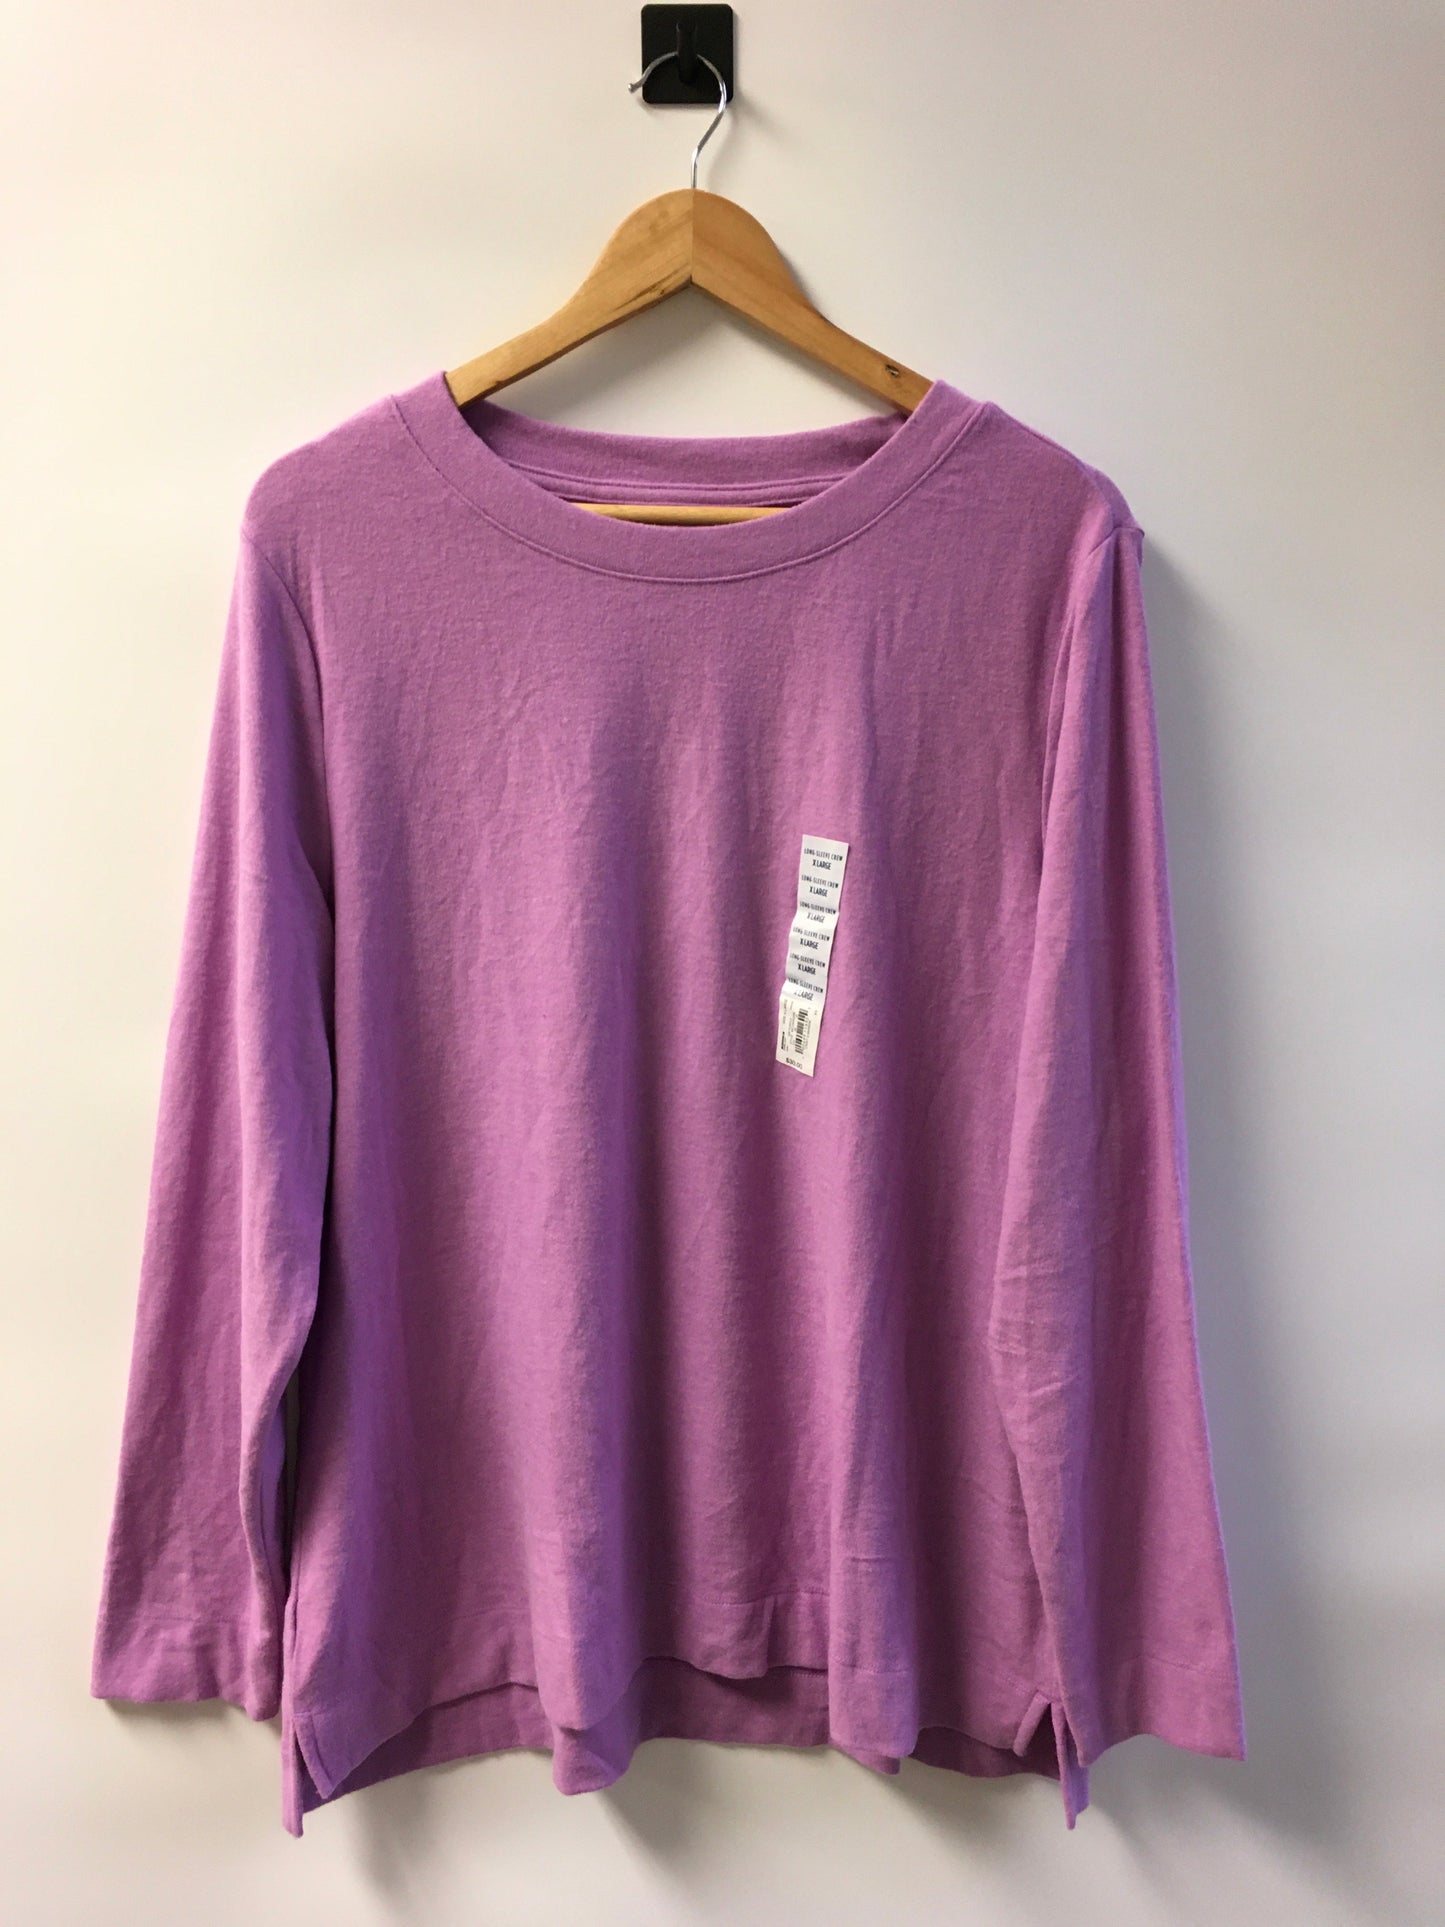 Top Long Sleeve Basic By Croft And Barrow  Size: Xl